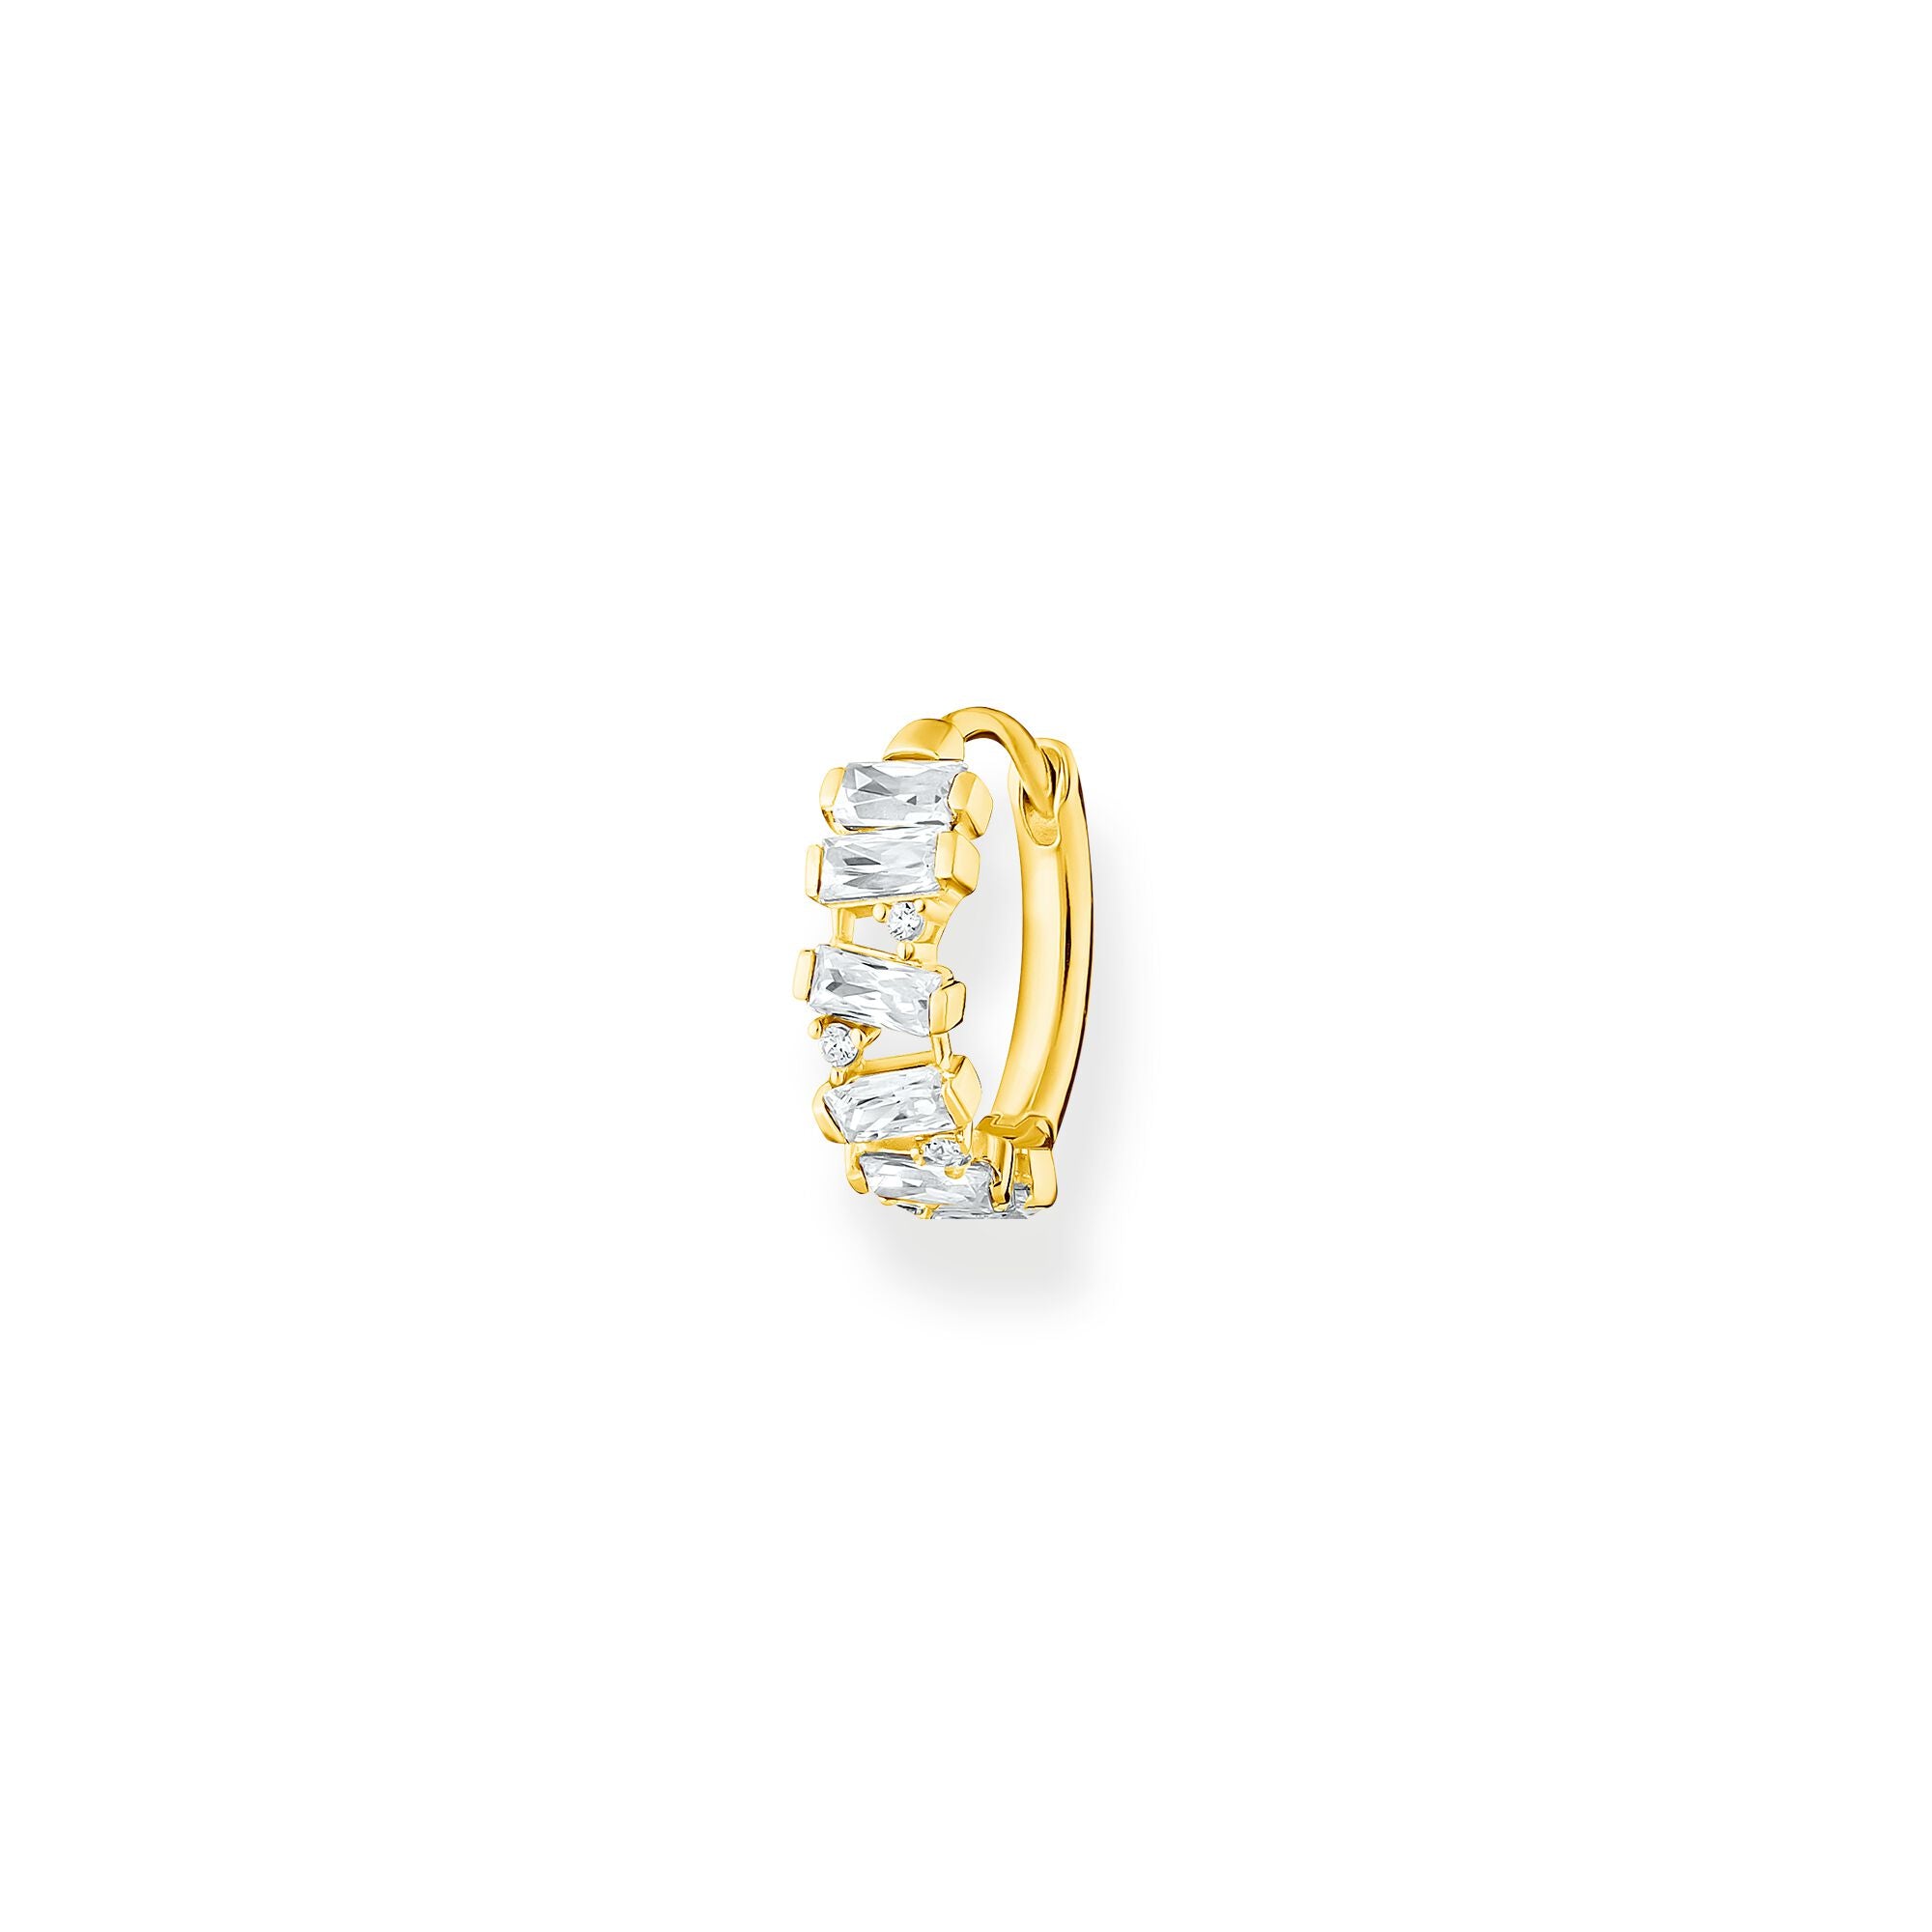 Thomas Sabo 18 karat Yellow Gold Plated Sterling Silver and Baguette CZ , single hoop earring